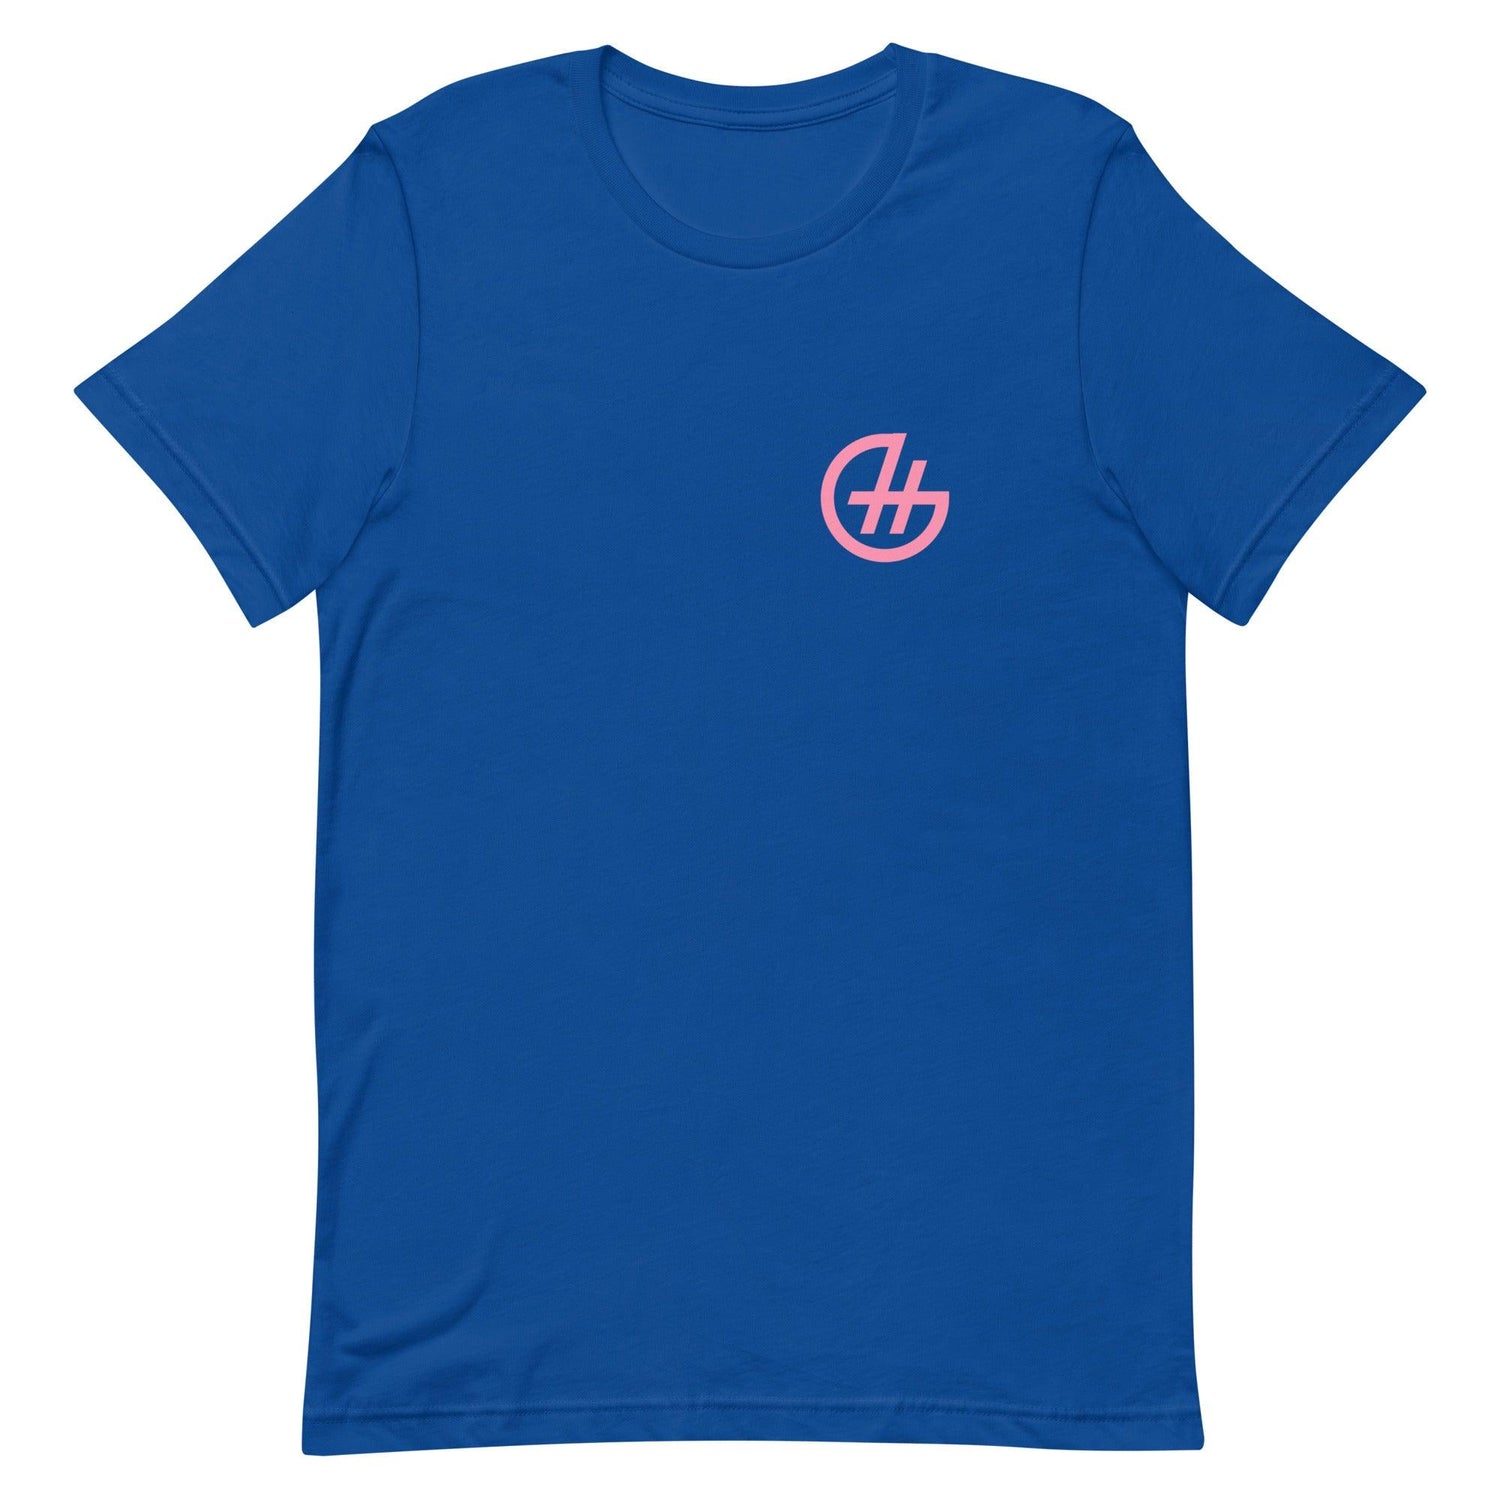 Hannah Gusters "The Brand" t-shirt - Fan Arch